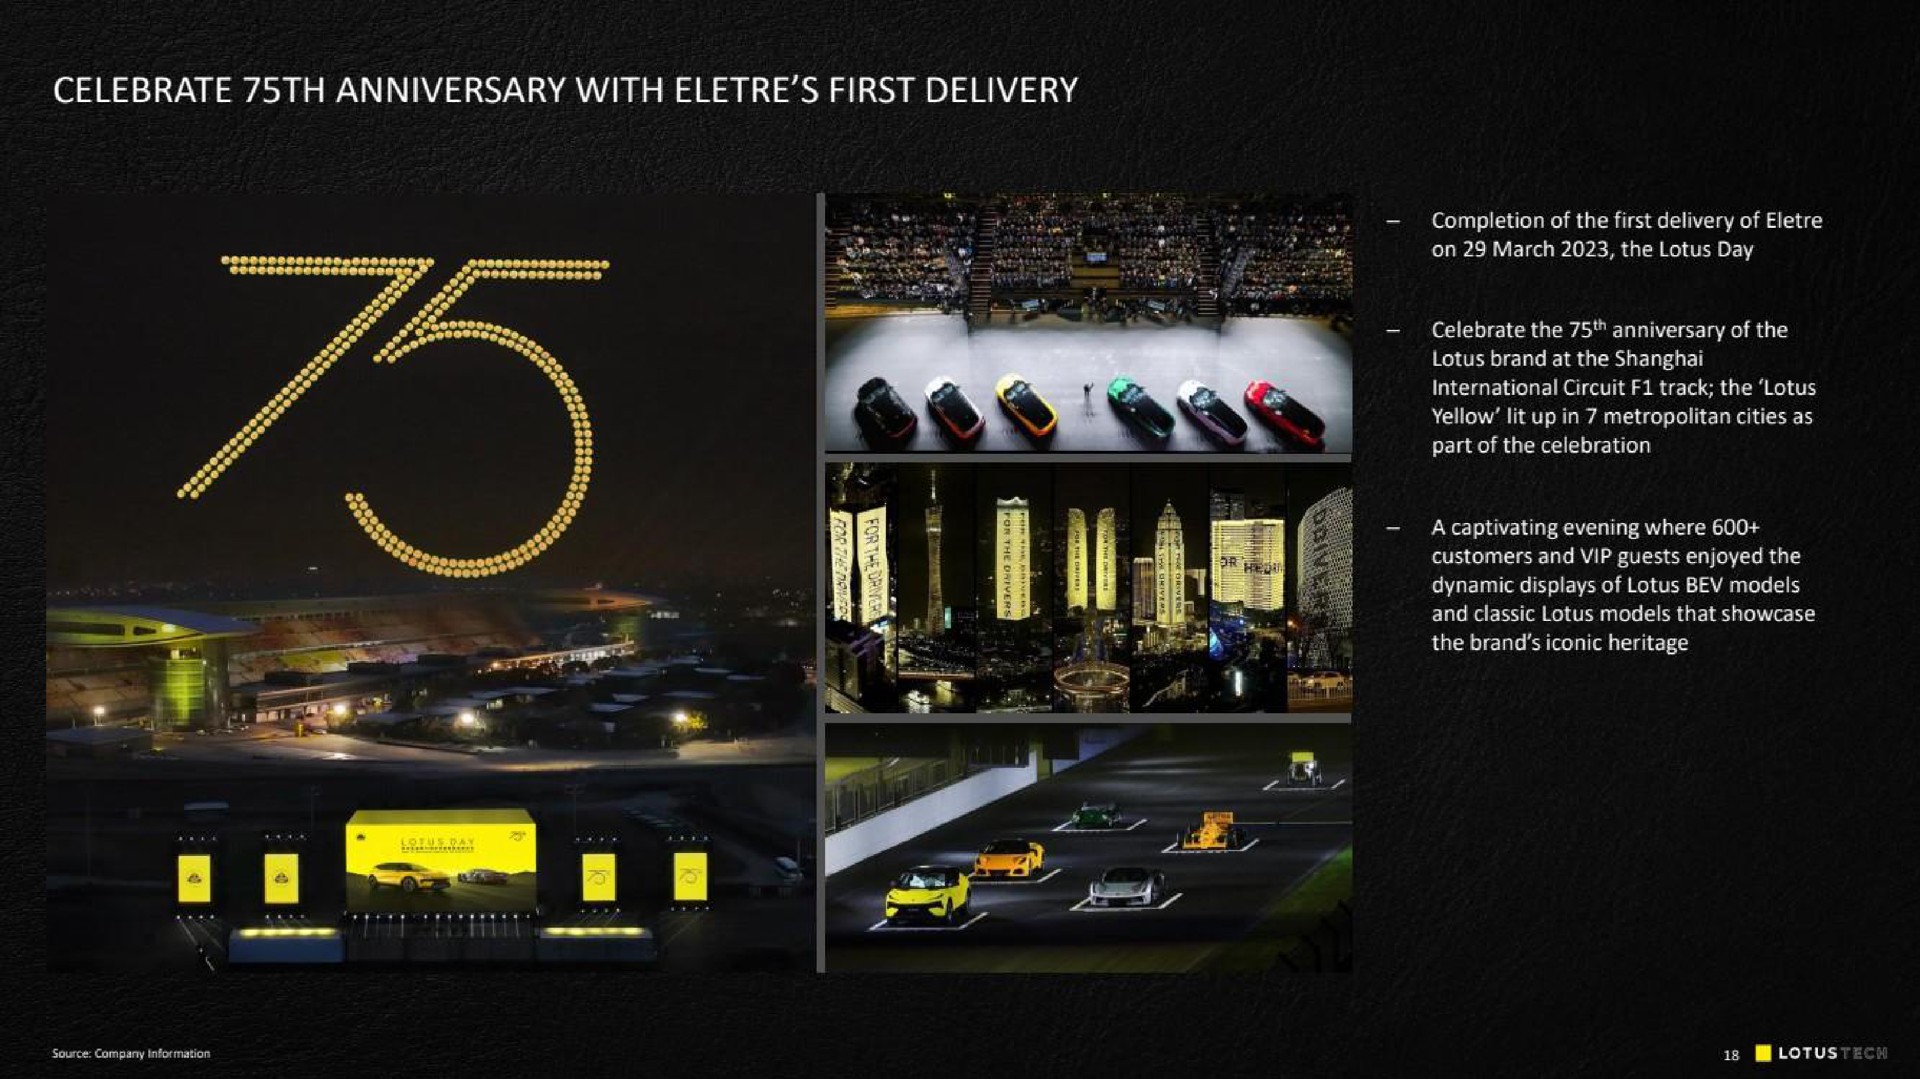 celebrate anniversary with first delivery | Lotus Cars